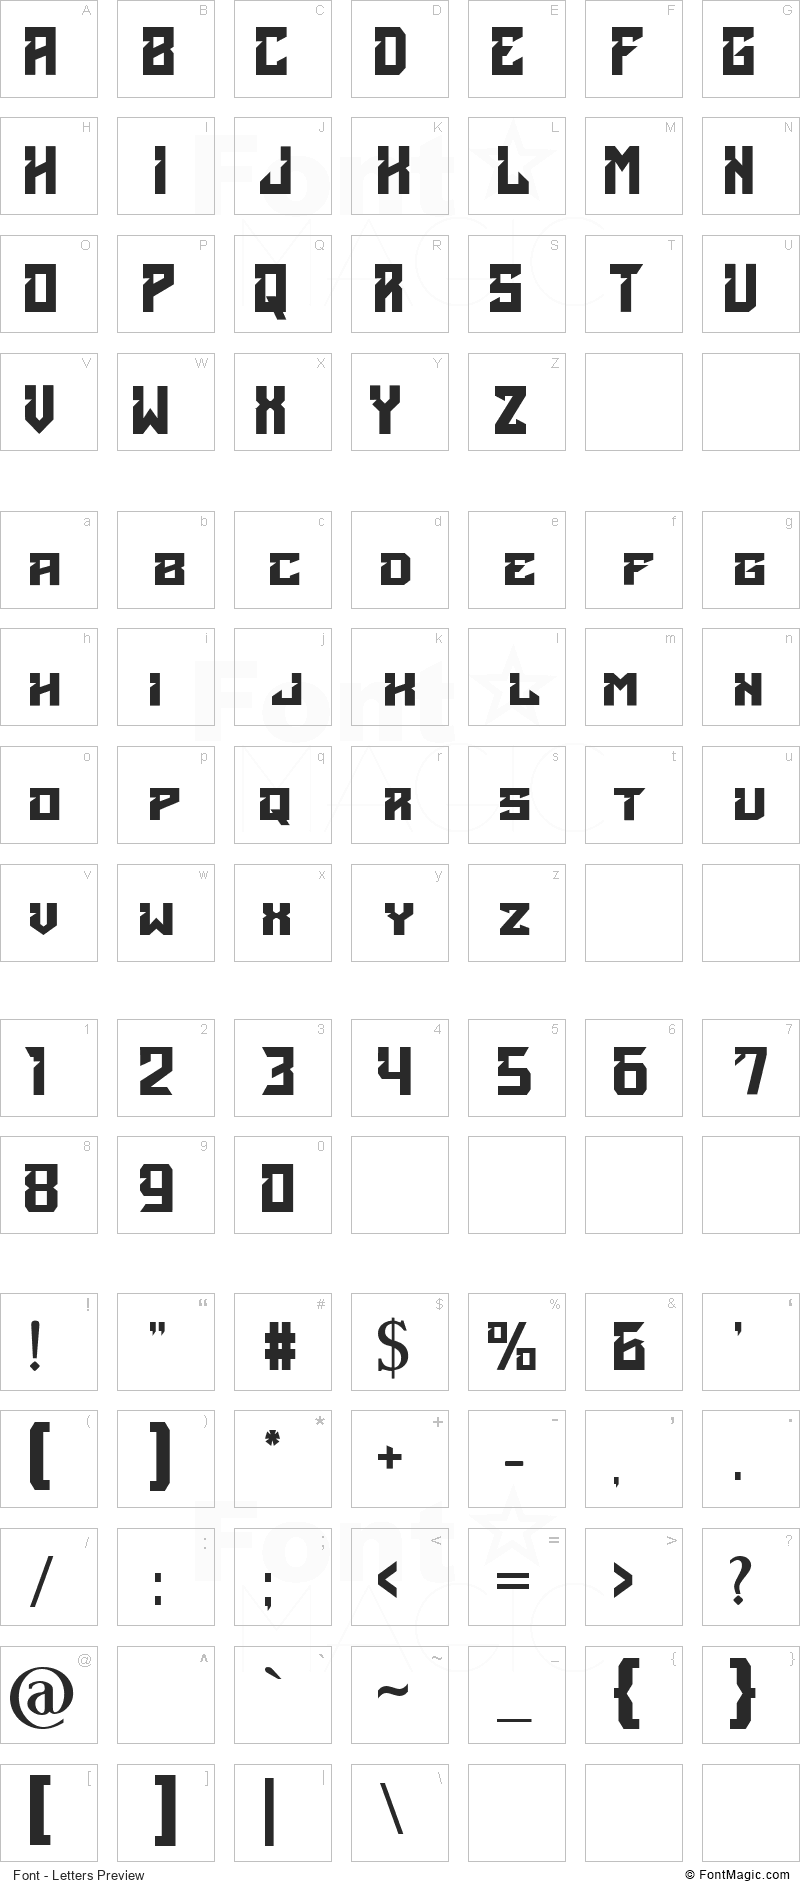 Acients Font - All Latters Preview Chart